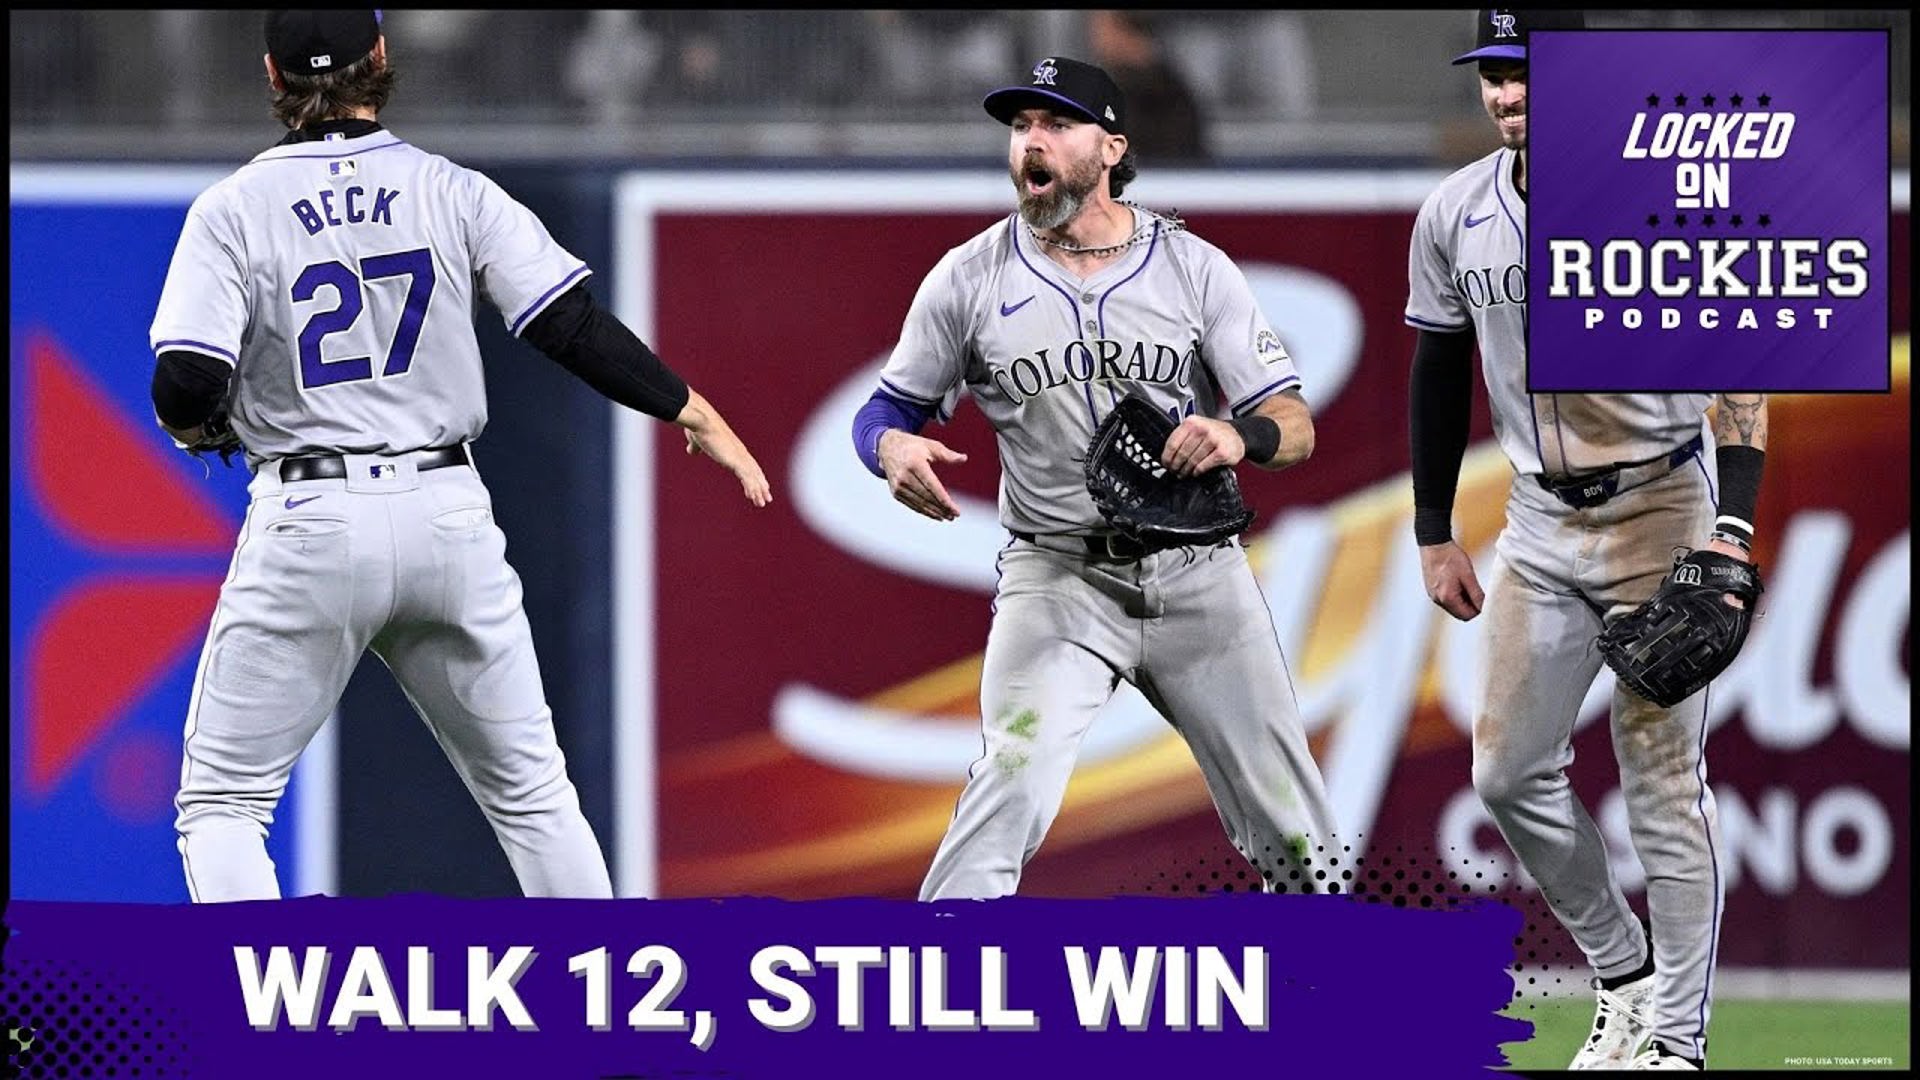 You know things are going good for the Rockies when they still win a game in which they walked 12 batters